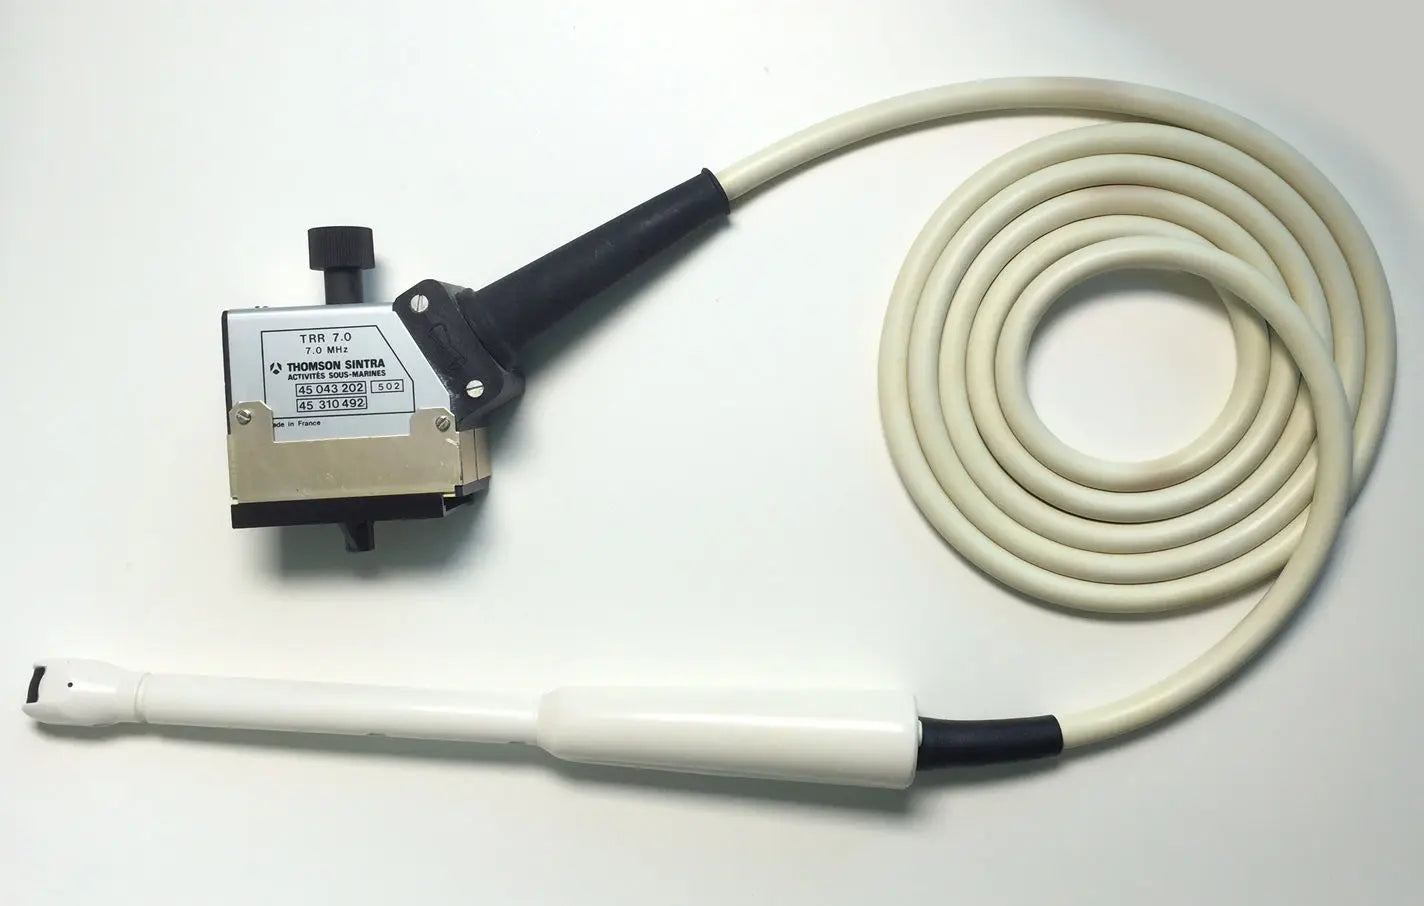 GE Thomson Sintra TRR 7 7.0 MHz.Convex Array Endovaginal Ultrasound Probe USED DIAGNOSTIC ULTRASOUND MACHINES FOR SALE